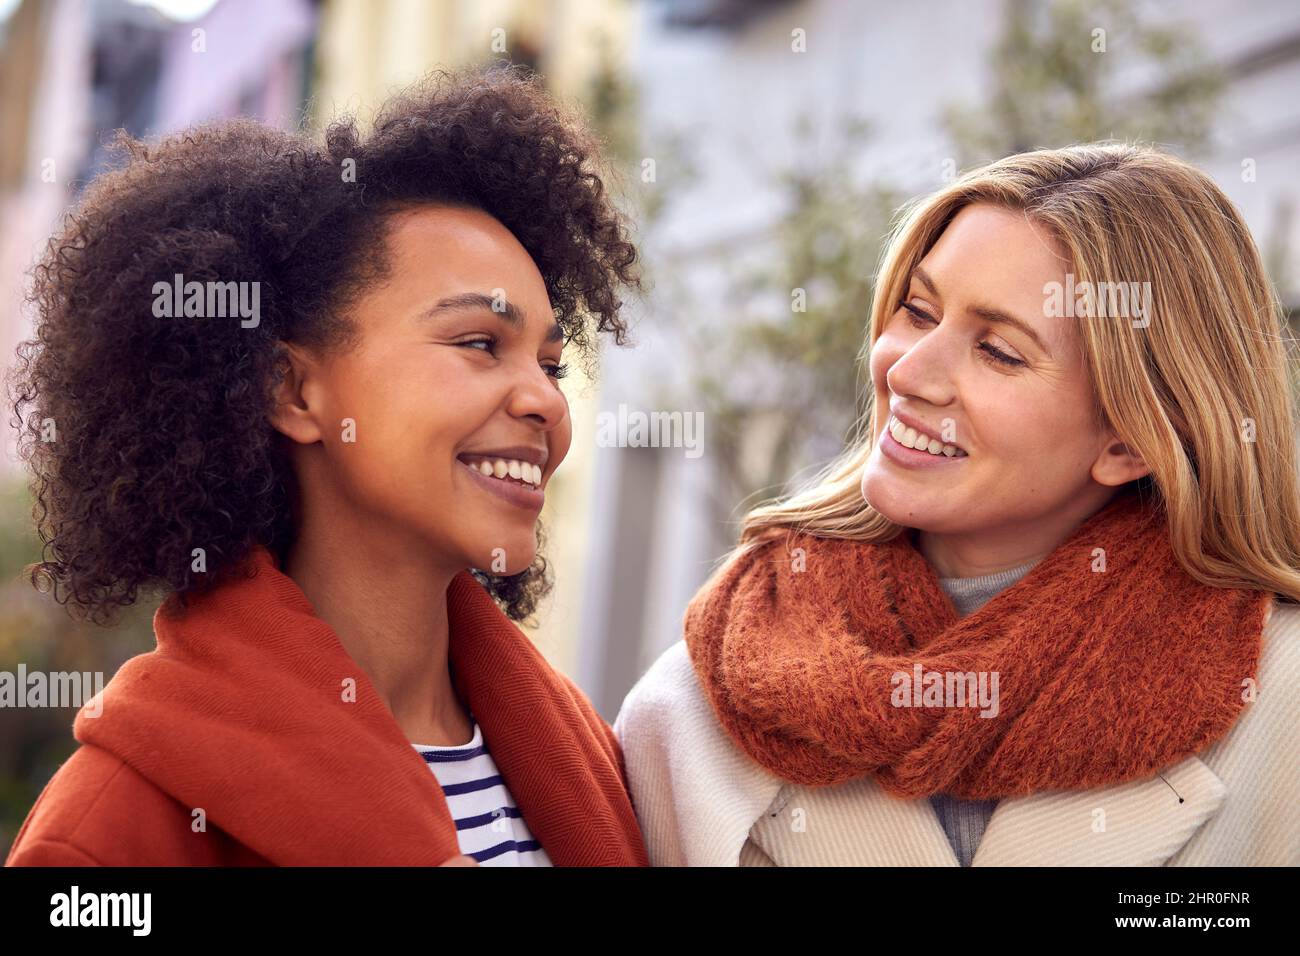 Outdoor Portrait Of Smiling Female Friends Wearing Coat And Scarf In Autumn Or Fall Stock Photo